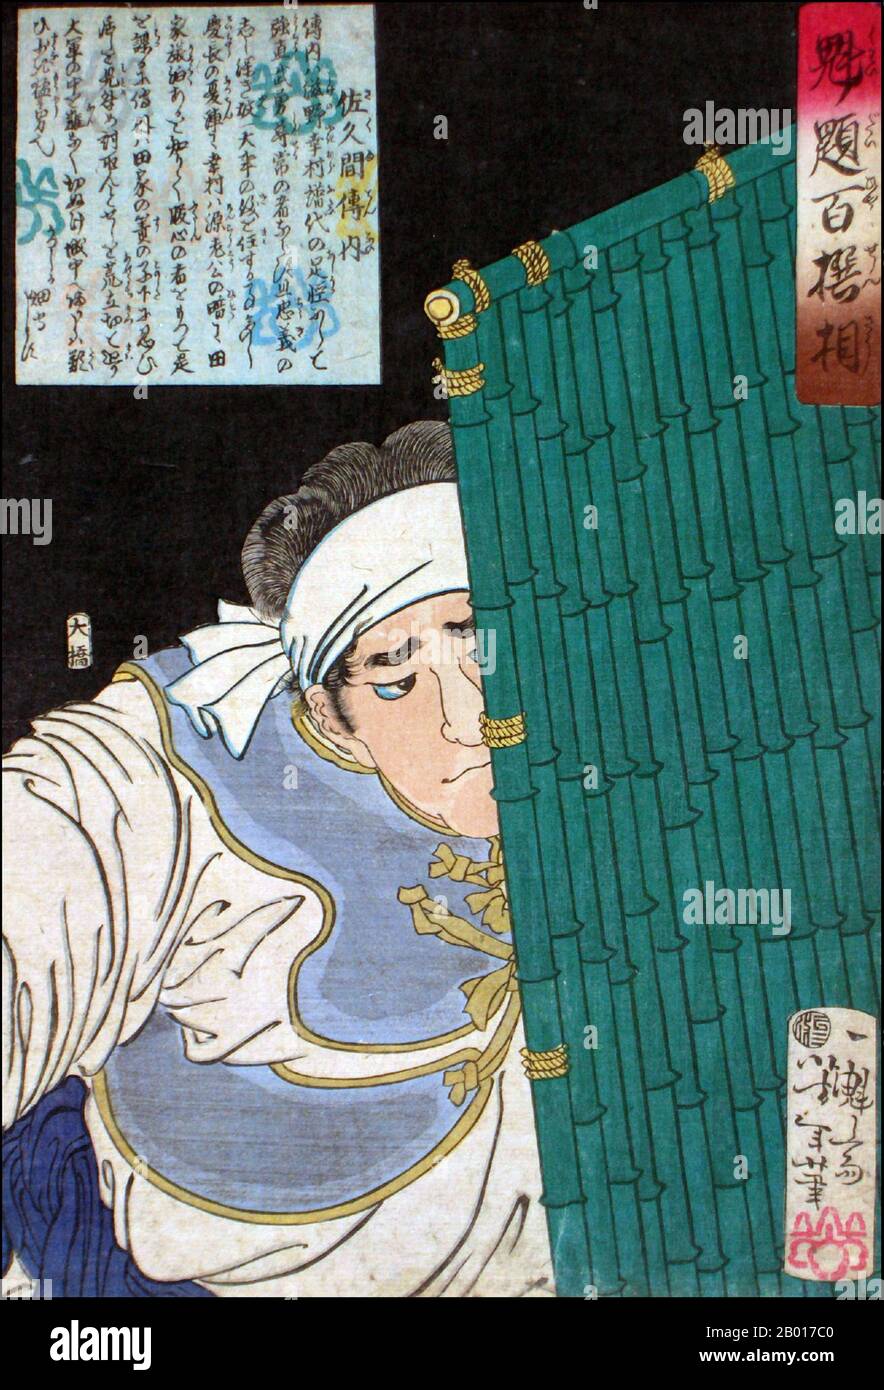 Japan: 'Sakuma Dennai with a Bamboo Shield'. Ukiyo-e woodblock print from the series 'Heroes of the Water Margin' by Tsukioka Yoshitoshi (1839 - 9 June 1892), 1869.  Tsukioka Yoshitoshi, also named Taiso Yoshitoshi, was a Japanese artist. He is widely recognized as the last great master of Ukiyo-e, a type of Japanese woodblock printing. He is additionally regarded as one of the form's greatest innovators. His career spanned two eras – the last years of feudal Japan, and the first years of modern Japan following the Meiji Restoration. Stock Photo